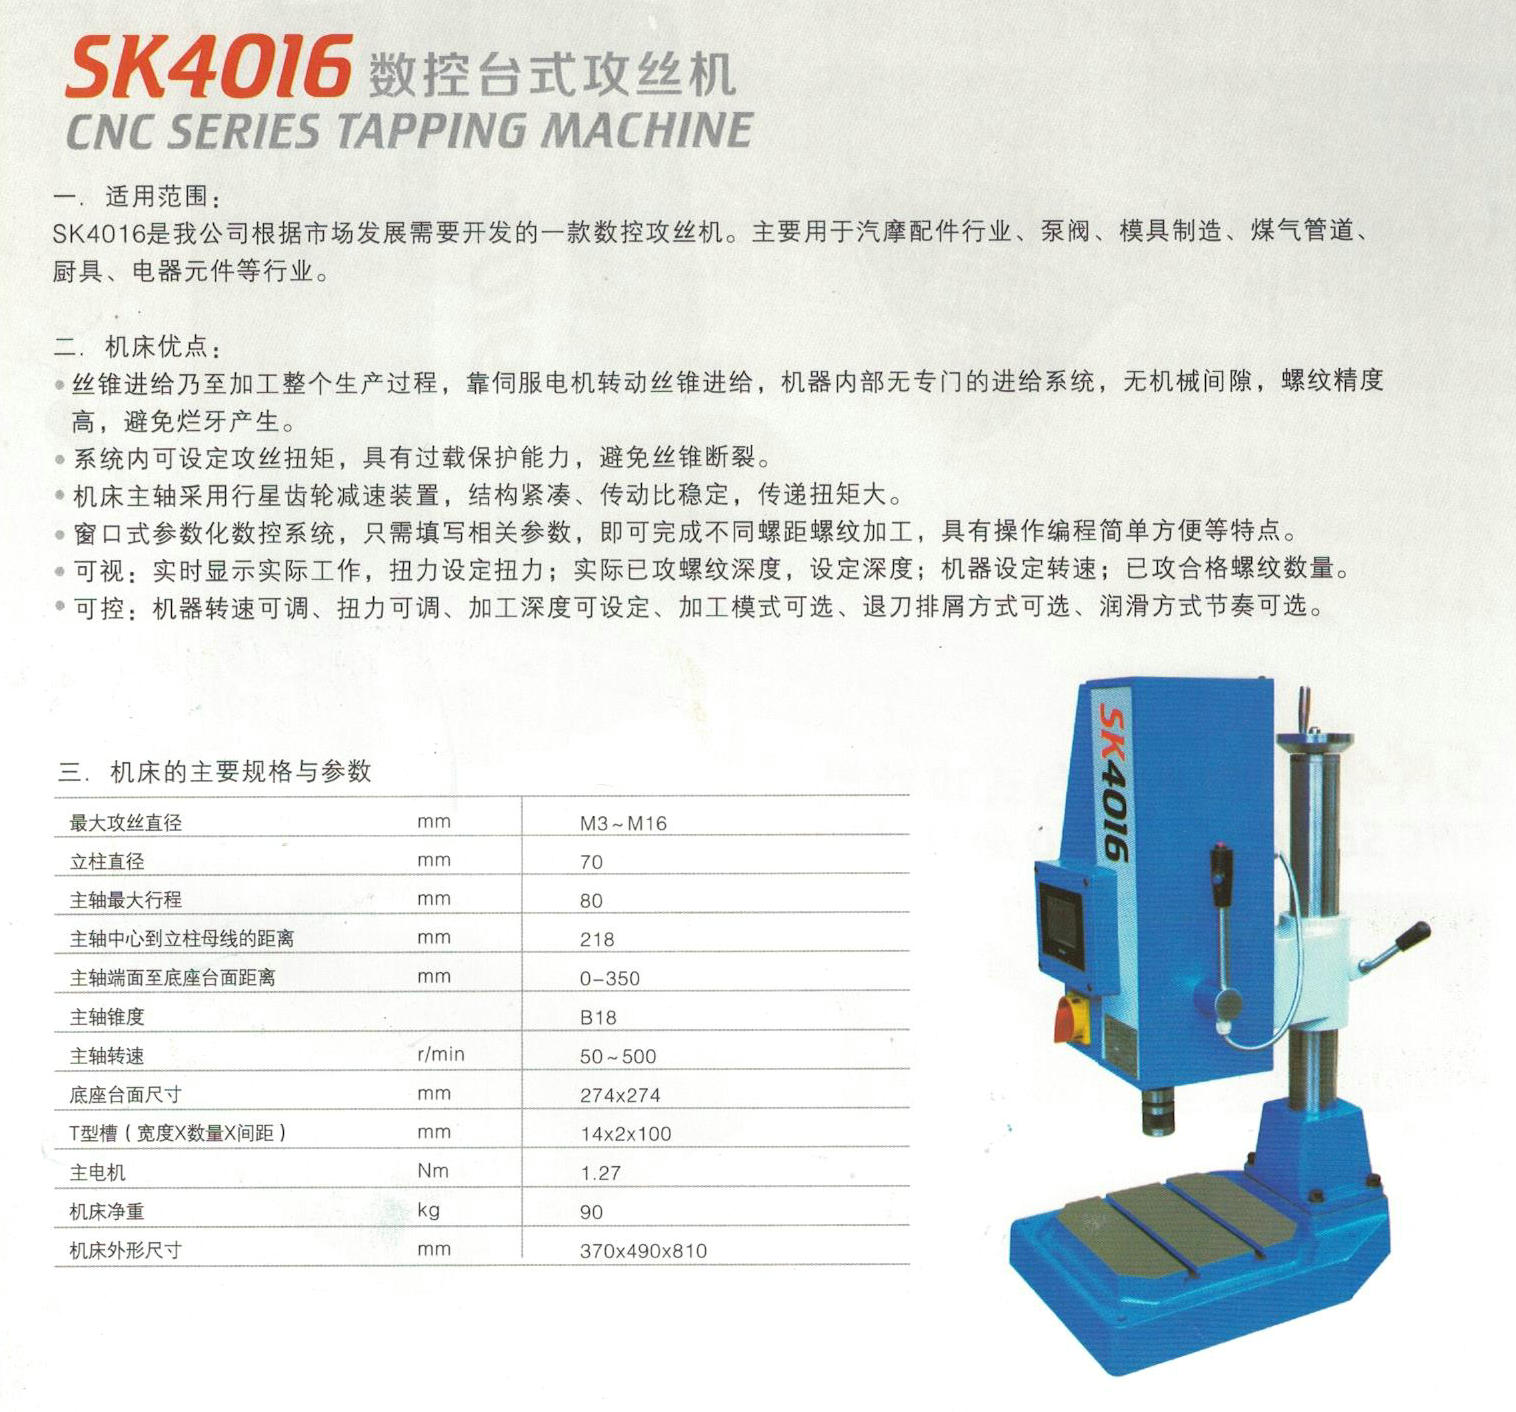 CNC SERIES TAPPING MACHINE SK4016